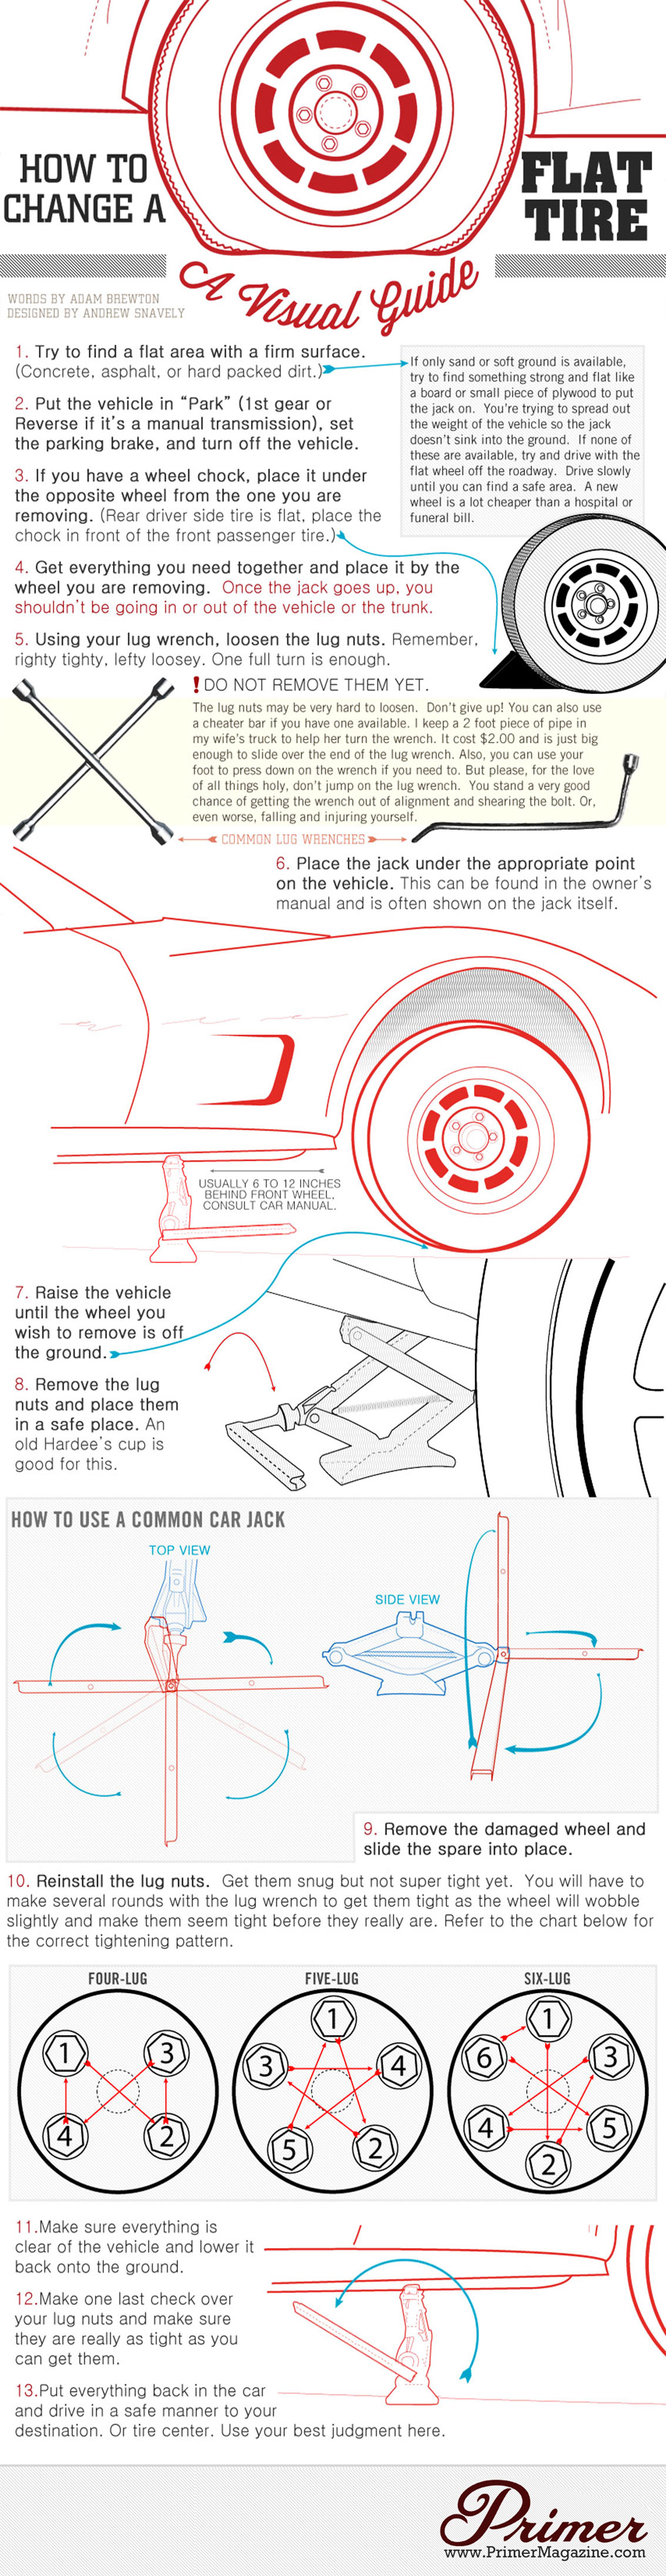 How to Change a Flat Tire on a Car Infographic